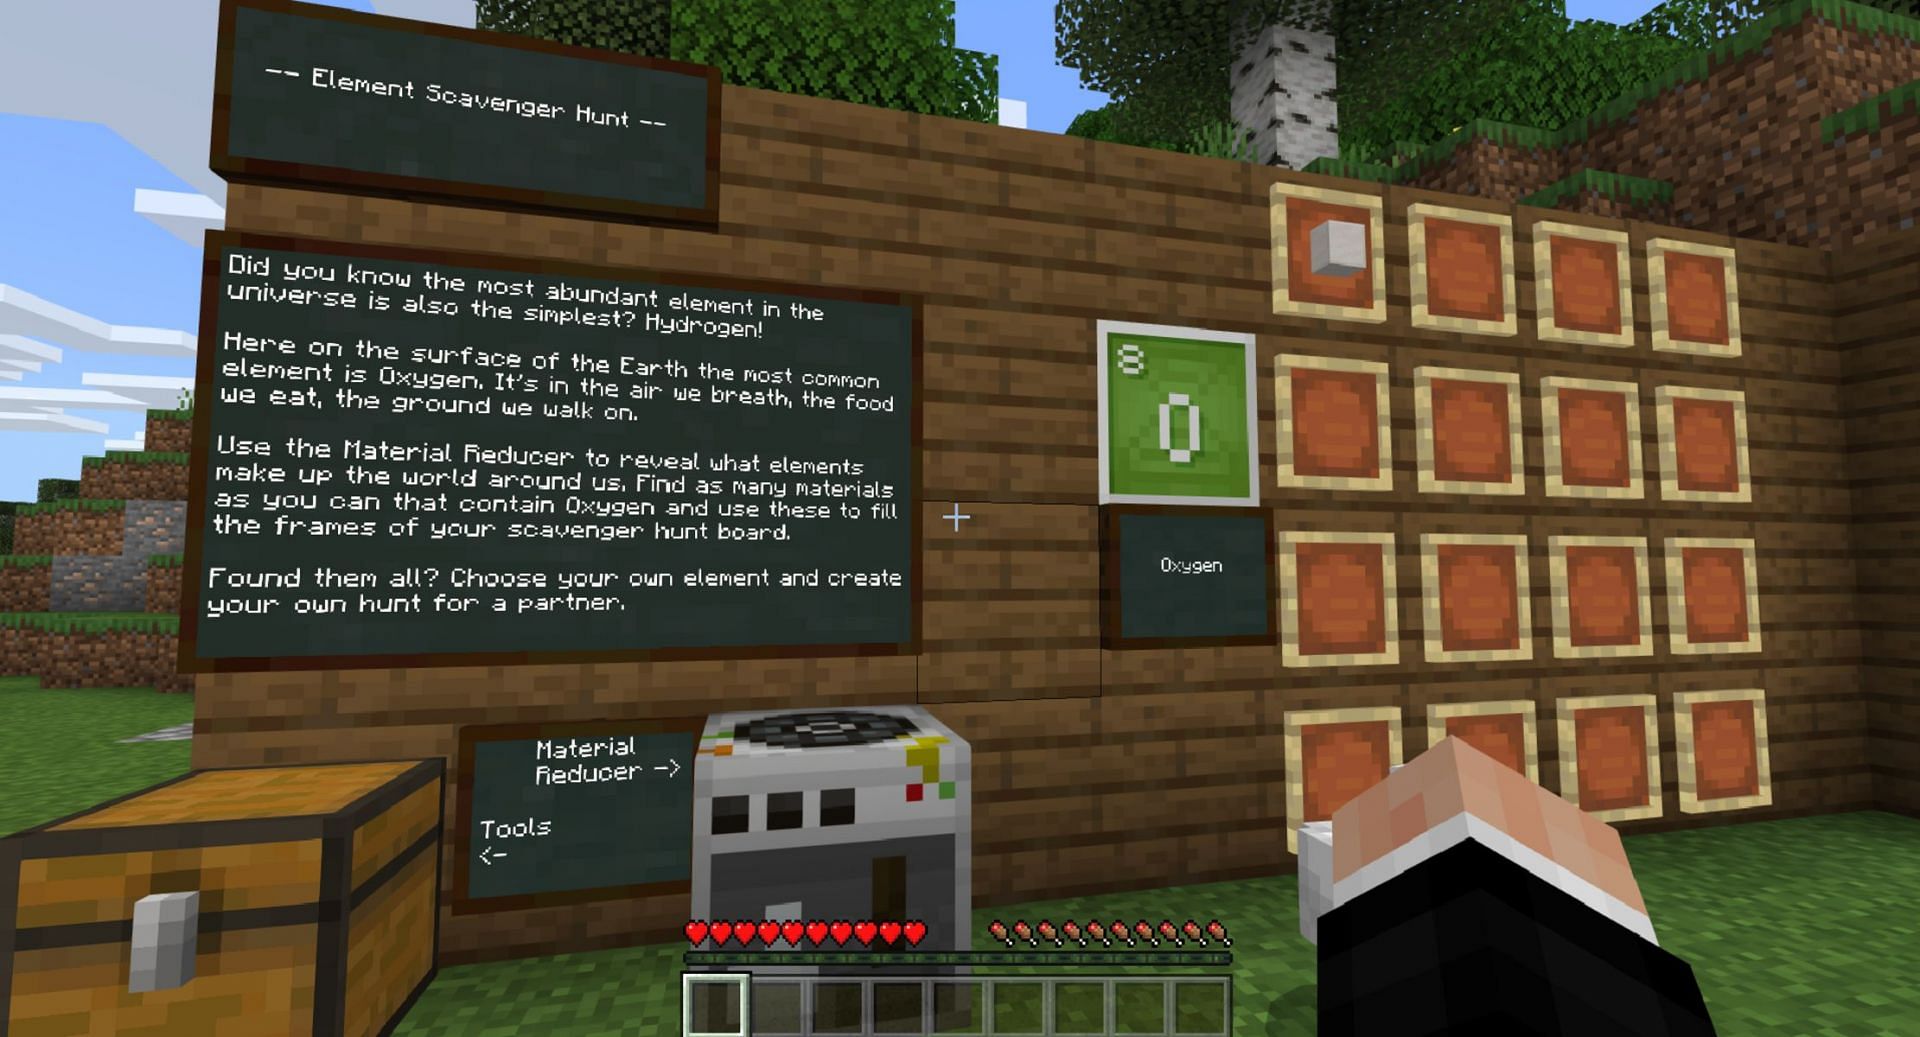 An educator organizes an element scavenger hunt, and the material reducer can be used as part of it (Image via Mojang).